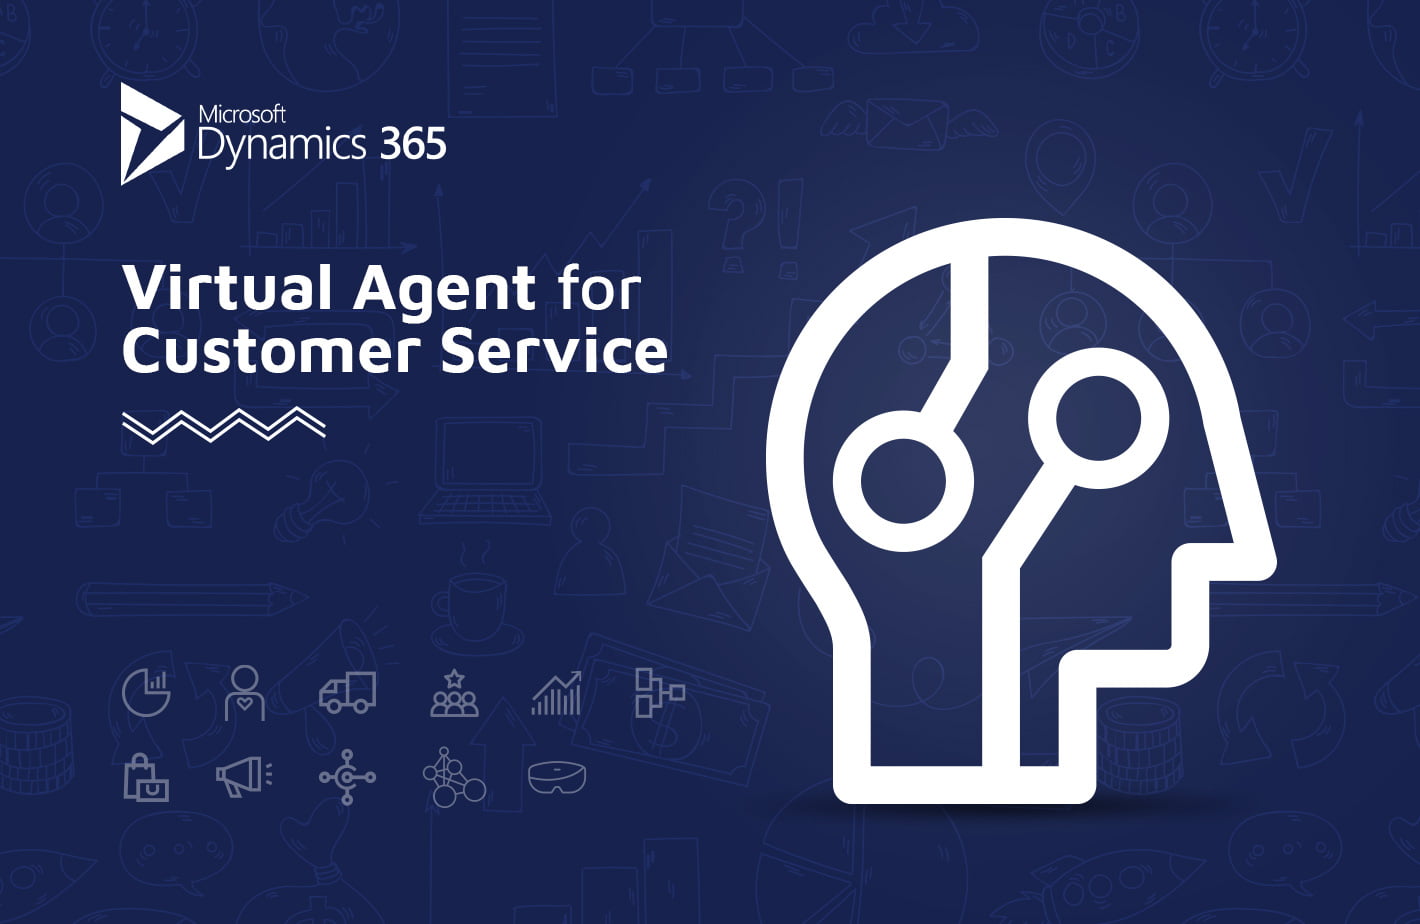 D365 Virtual Agent for Customer Service